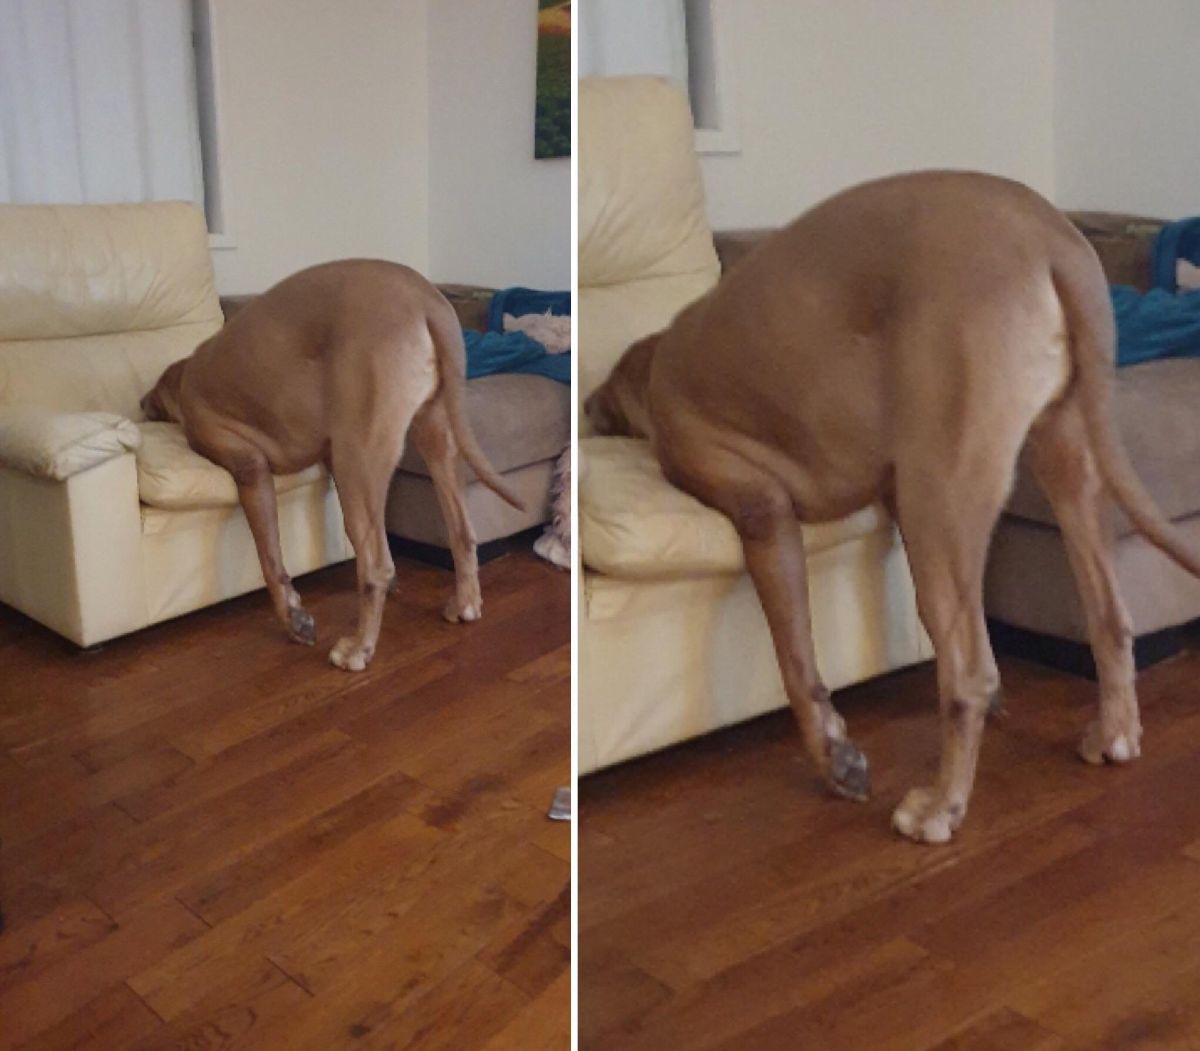 2 photos of a brown dog standing on the floor and planting its face into a beige chair